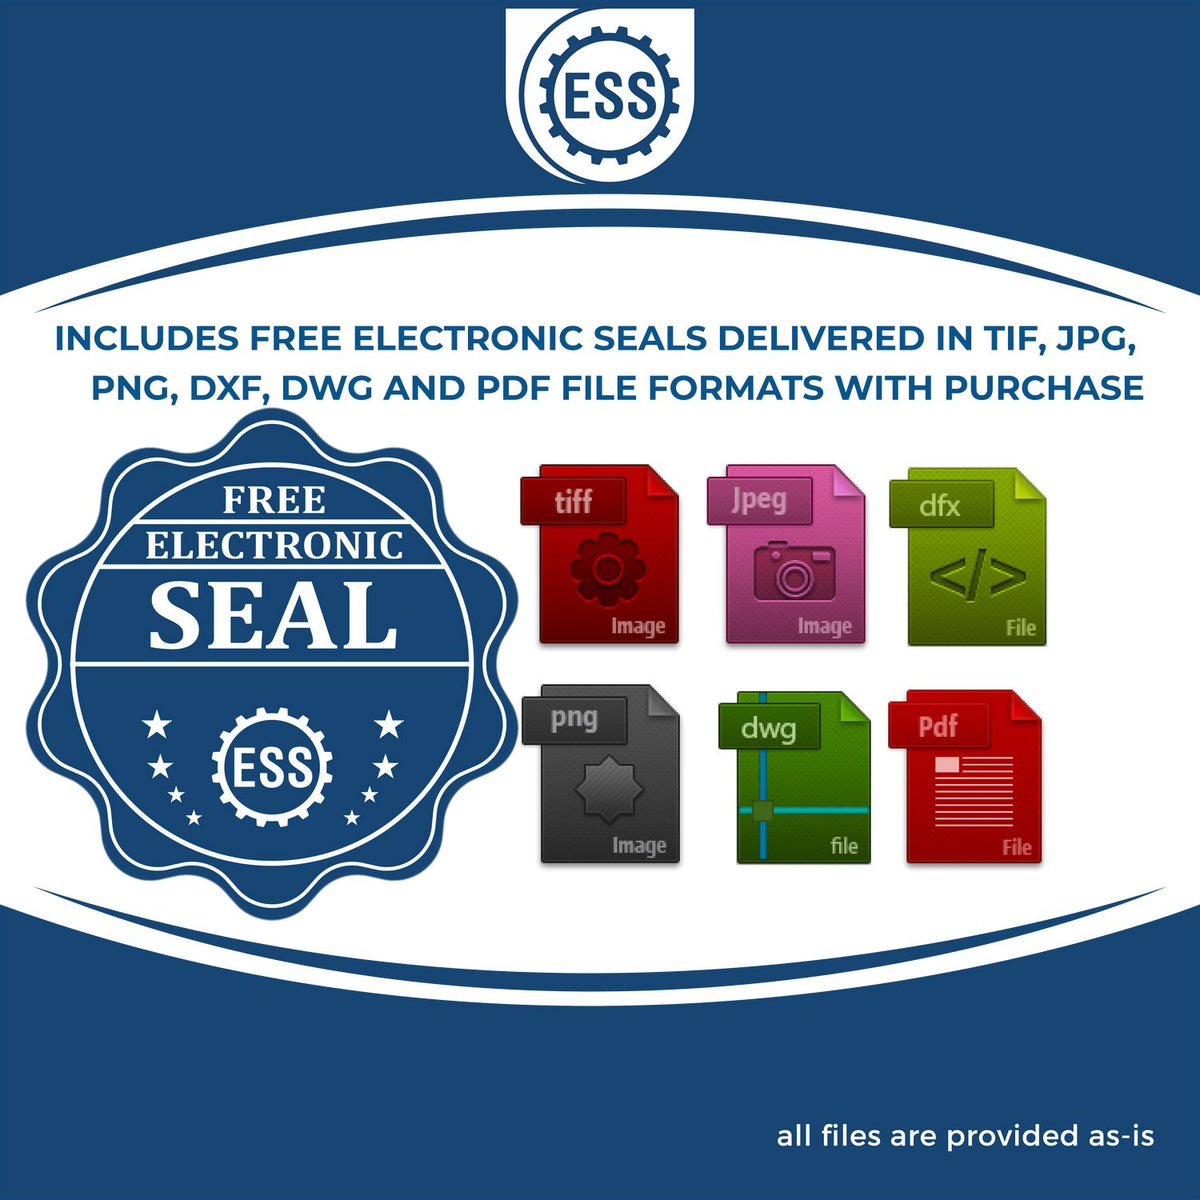 An infographic for the free electronic seal for the Self-Inking Texas Geologist Stamp illustrating the different file type icons such as DXF, DWG, TIF, JPG and PNG.